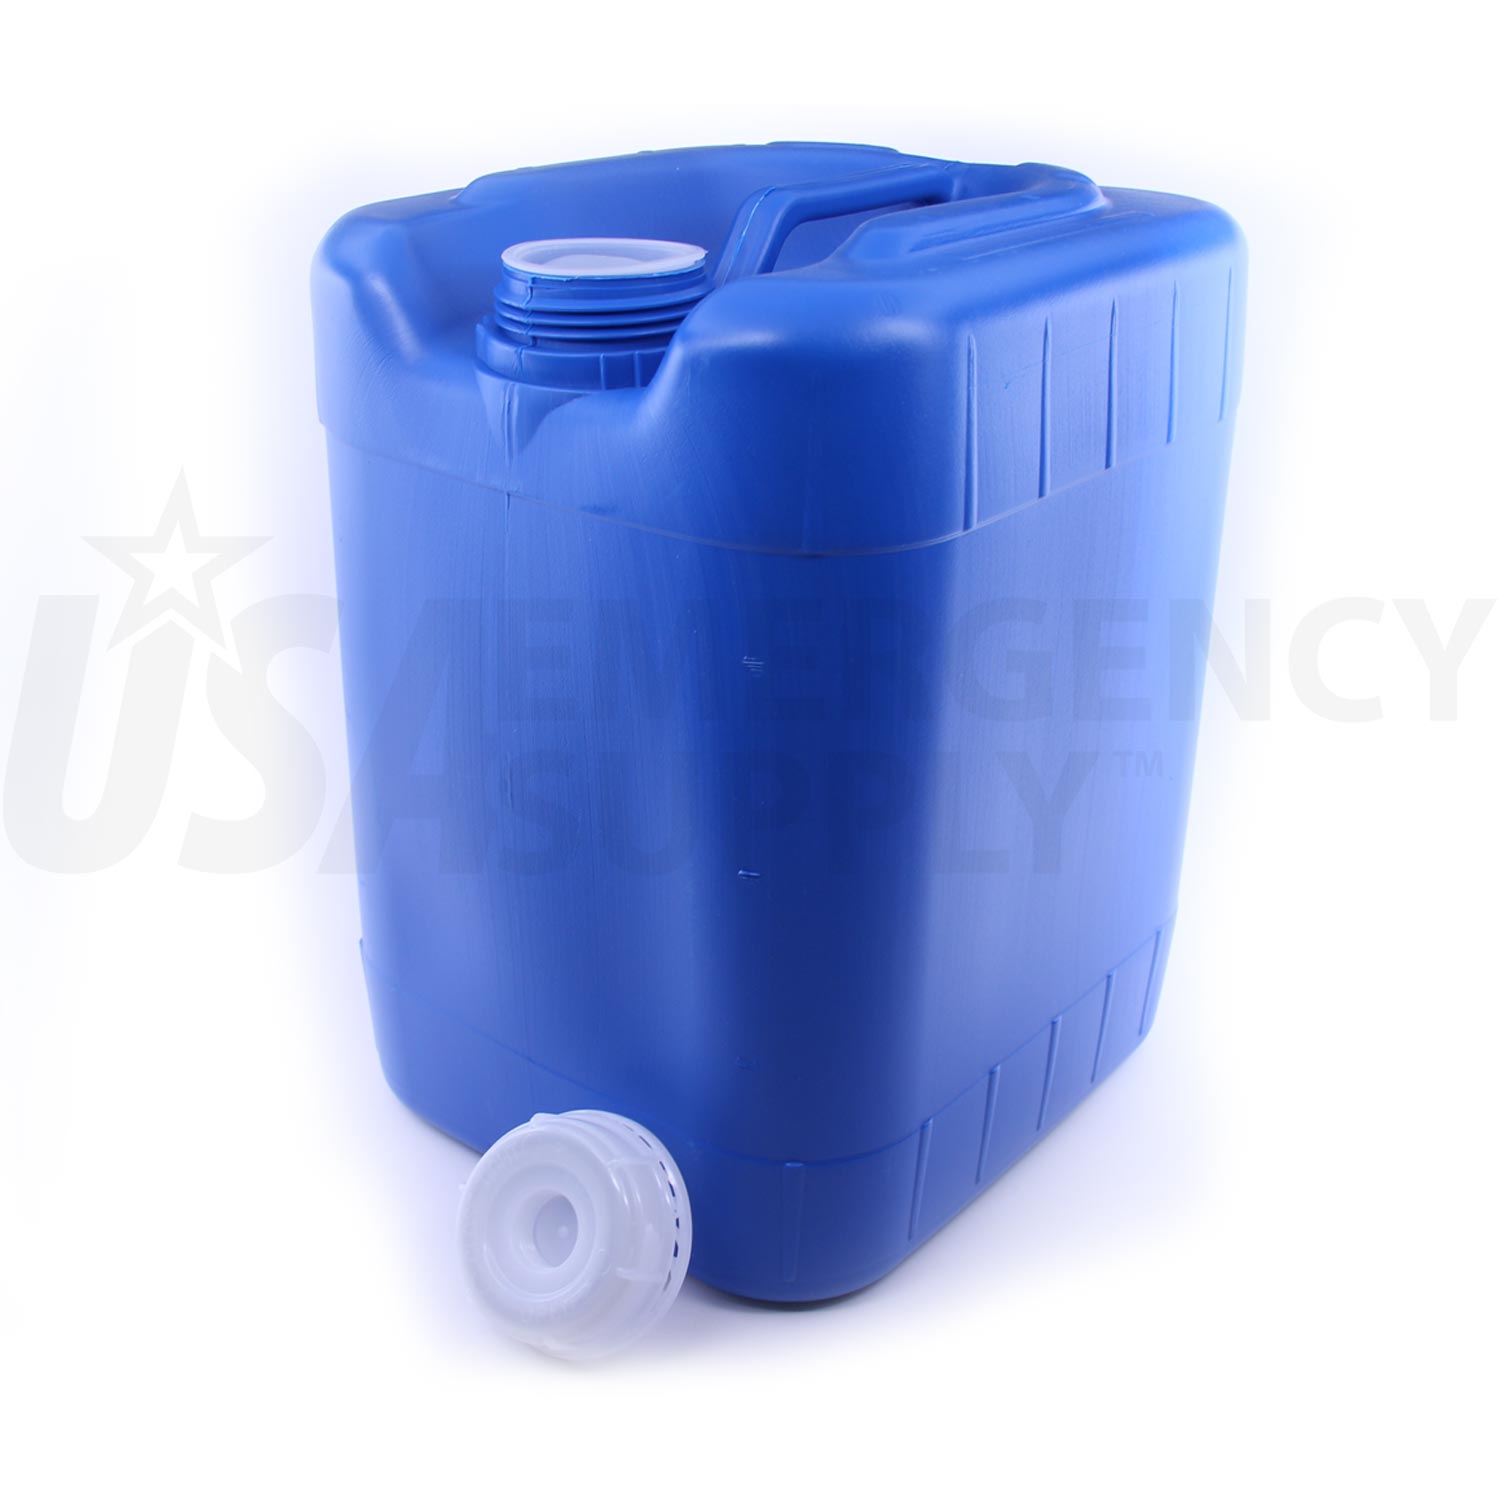 https://www.usaemergencysupply.com/media/img/products/lg/5-gallon-sampson-stackable-water-container-b-lg.jpg